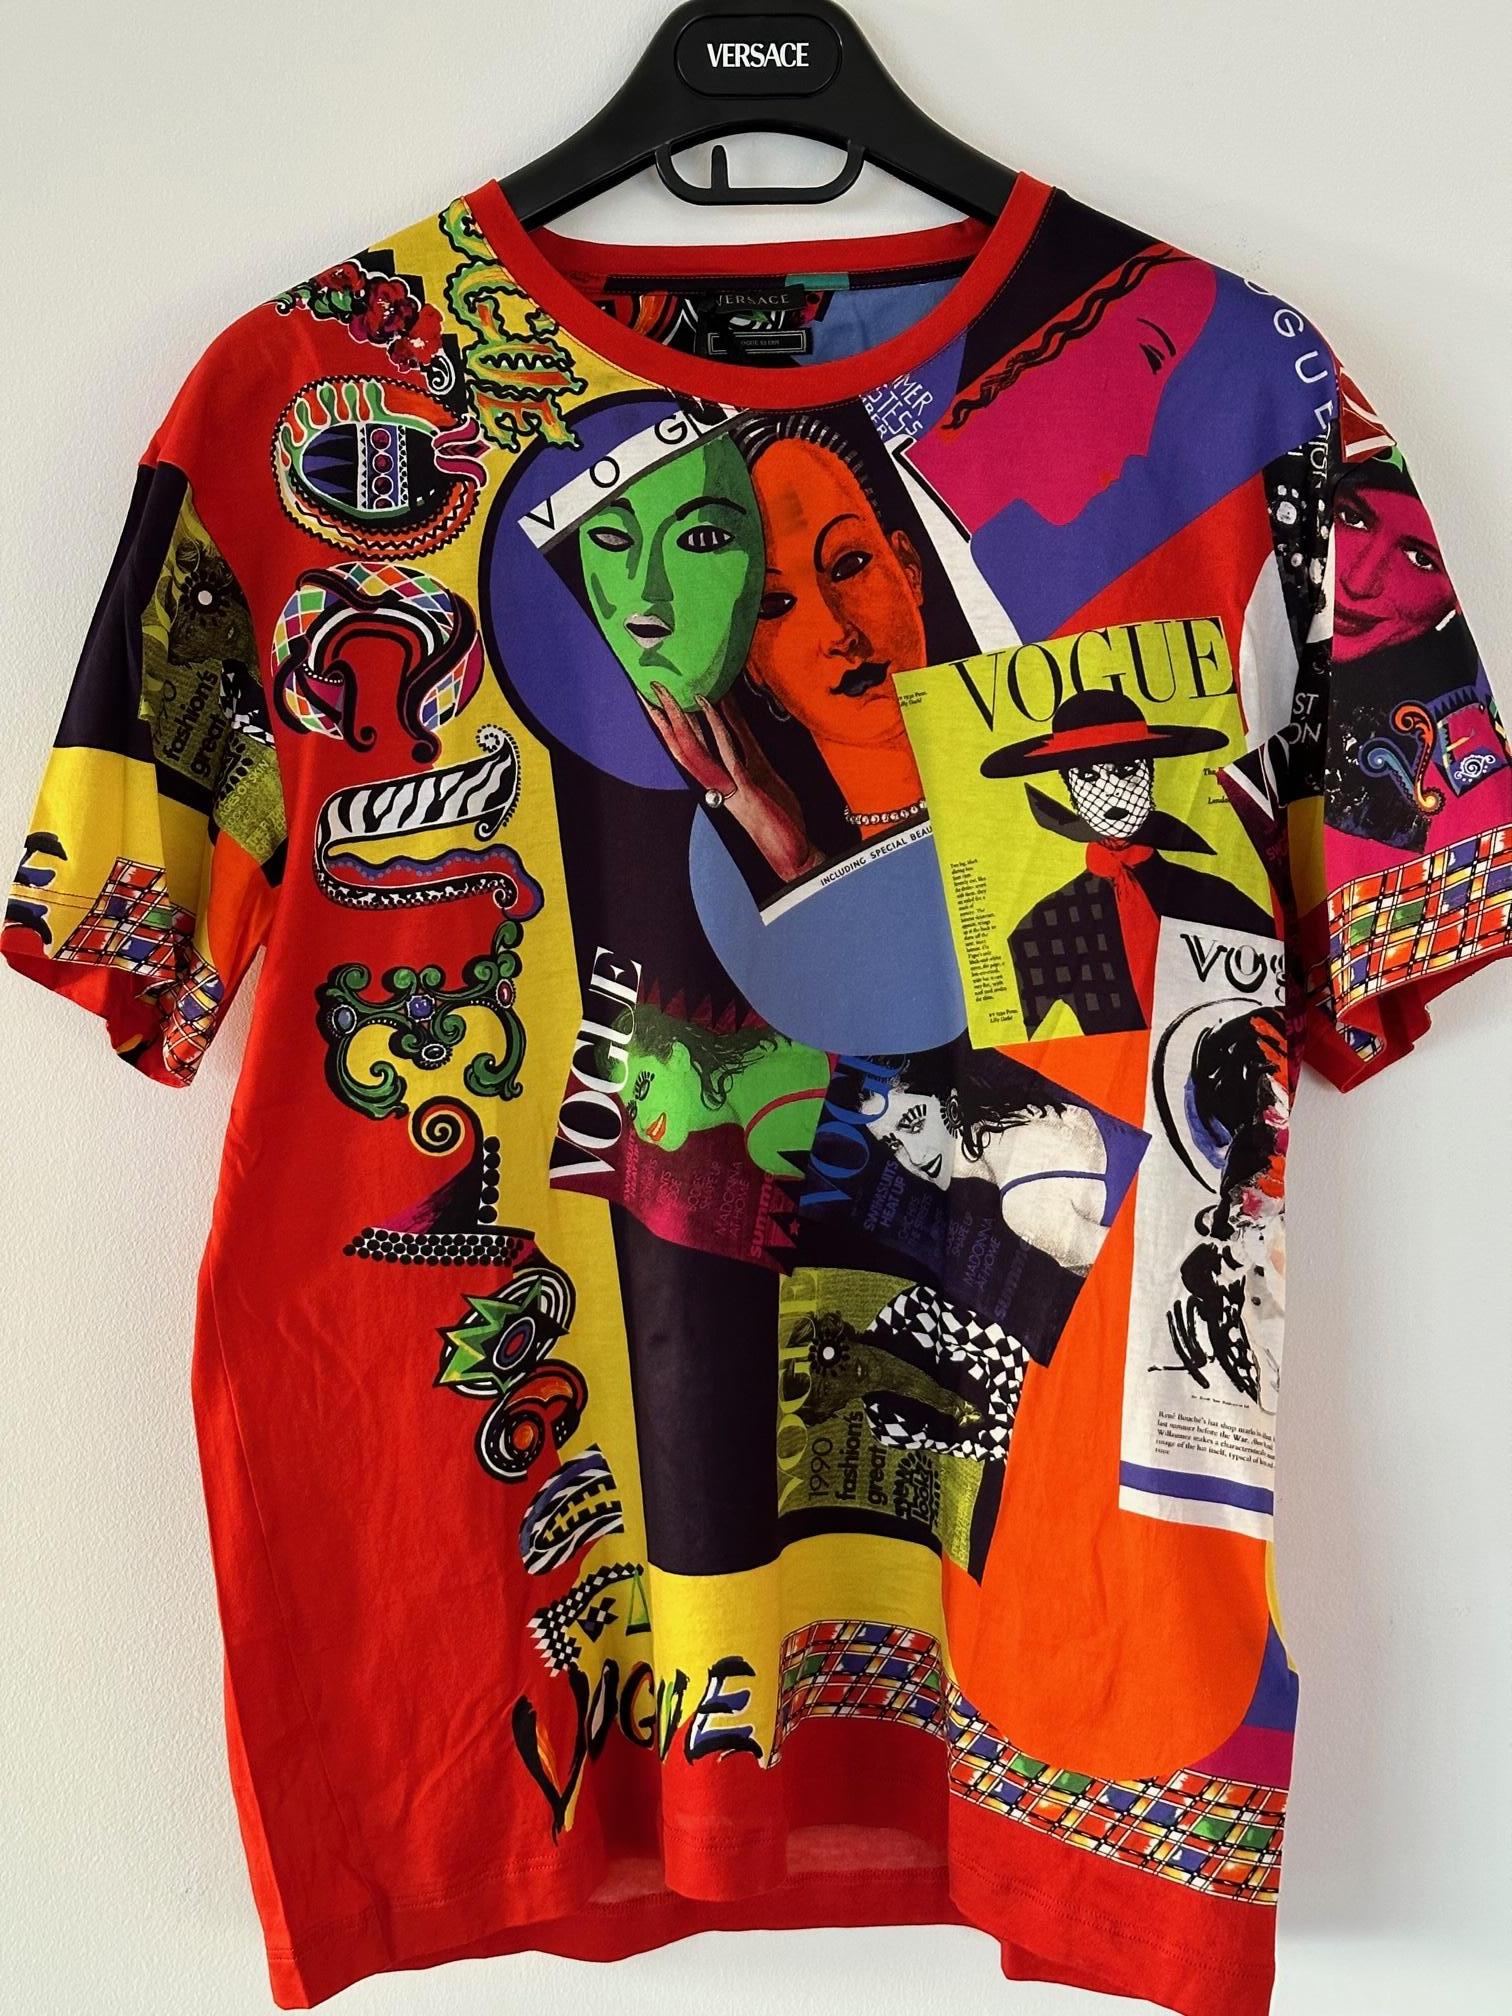 VERSACE Spring Summer 2018 Limited
Edition Tribute T-Shirts
The Vogue print from GIANNI
VERSACE'S Spring Summer 1991 collection...
Following Versace's spring 2018 runway show, which paid tribute to the creativity of Gianni Versace on the 20th